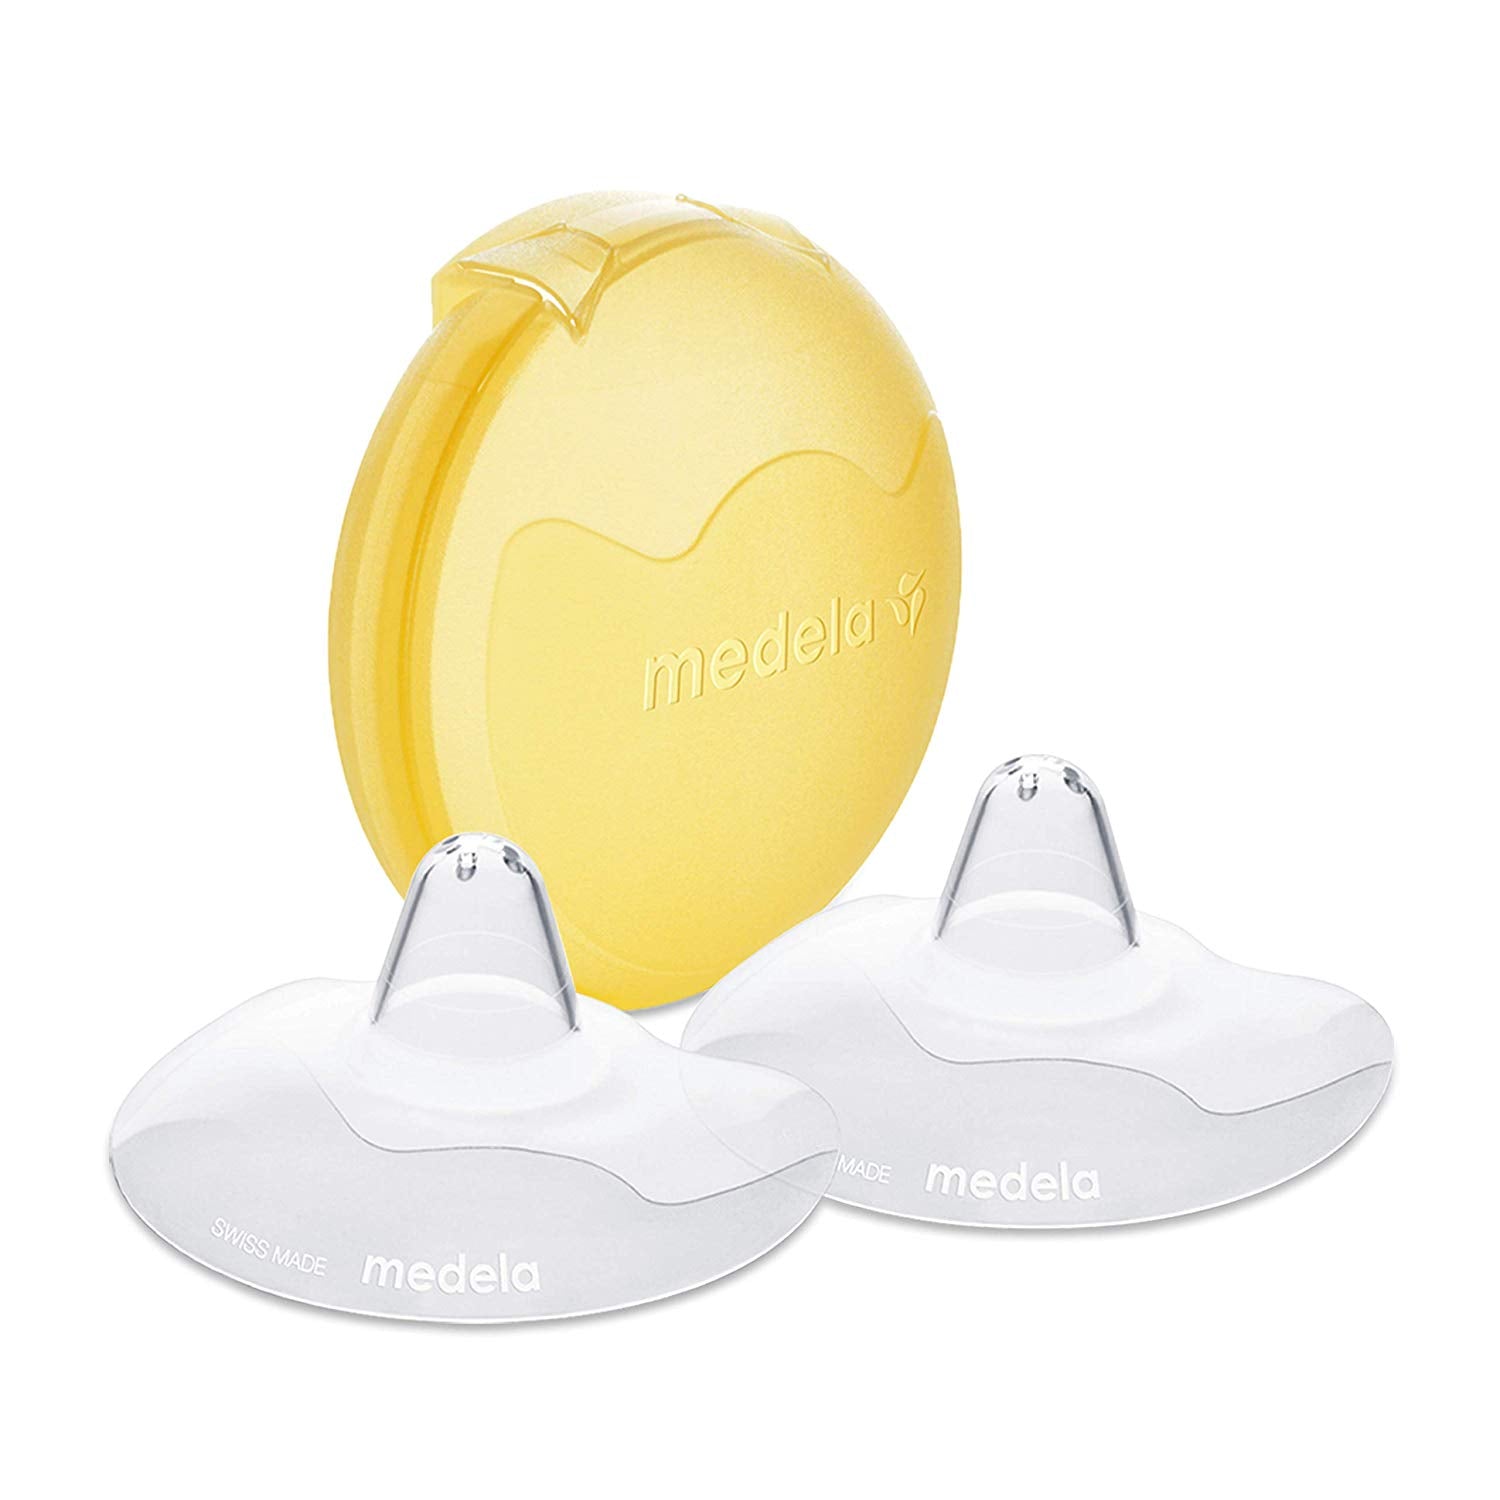 MEDELA Contact Nipple Shields and Case Available 16mm, 20mm, 24mm - ANB Baby -Less than $20